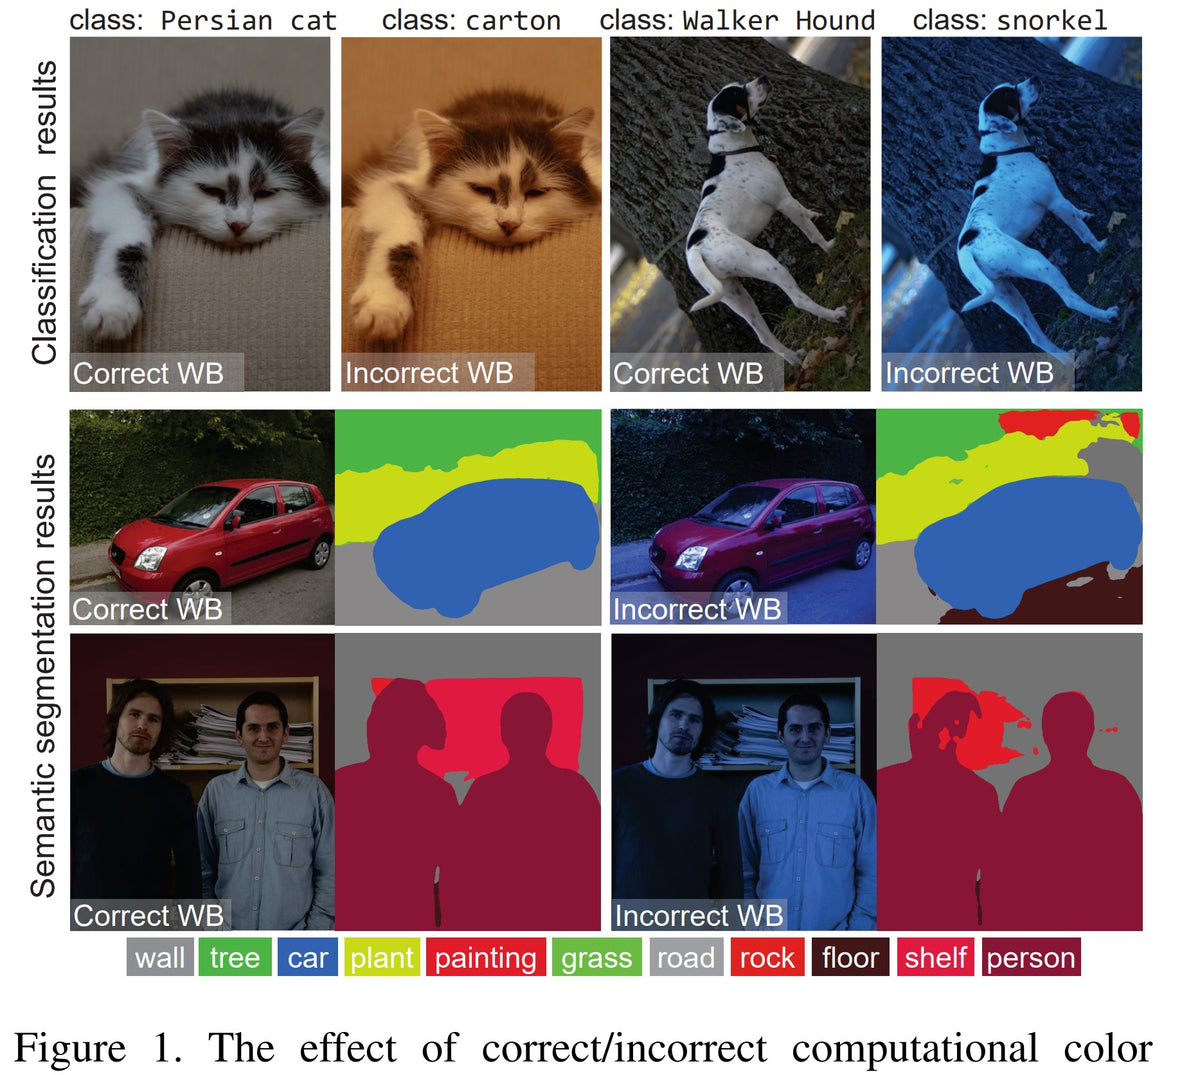 Color Reduces computer vision Class Accuracy